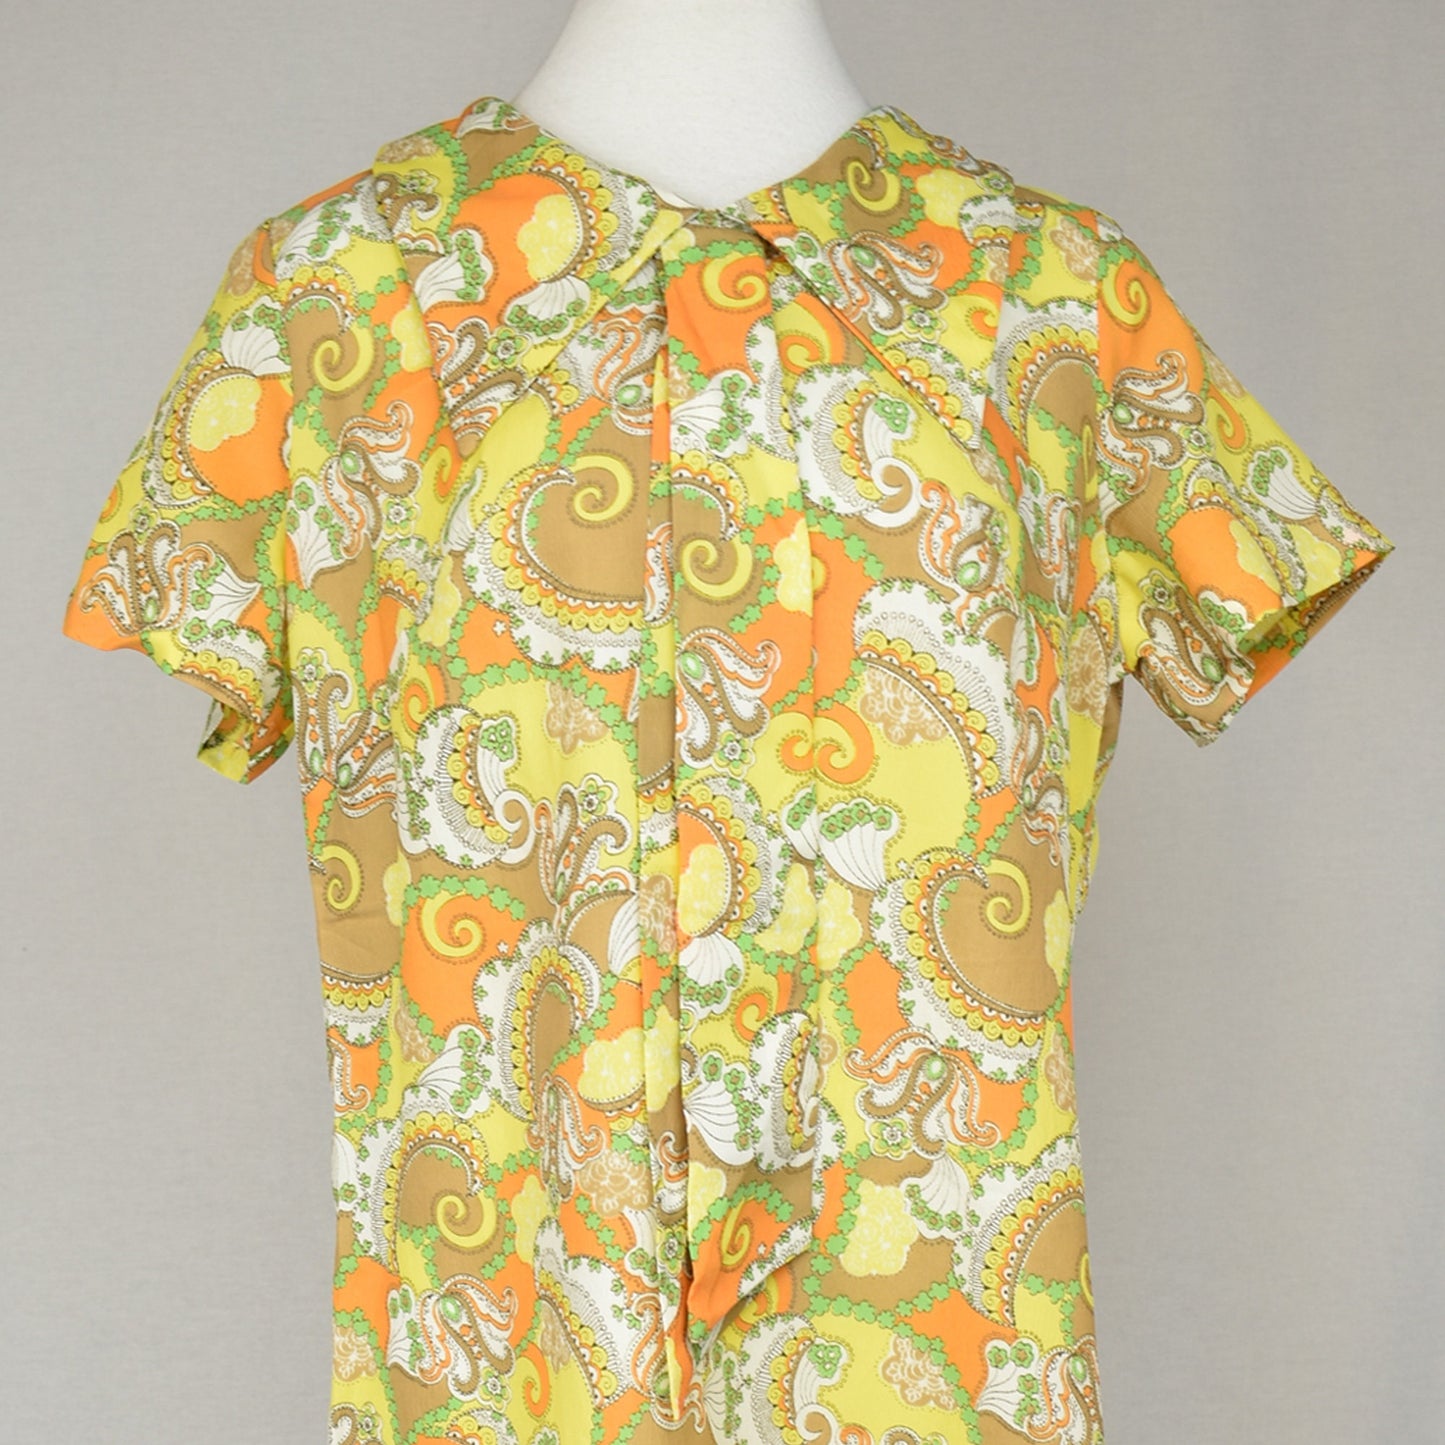 Vintage Swinging 60s Dress - Fun Psychedelic Pattern - Big Collar & Bow